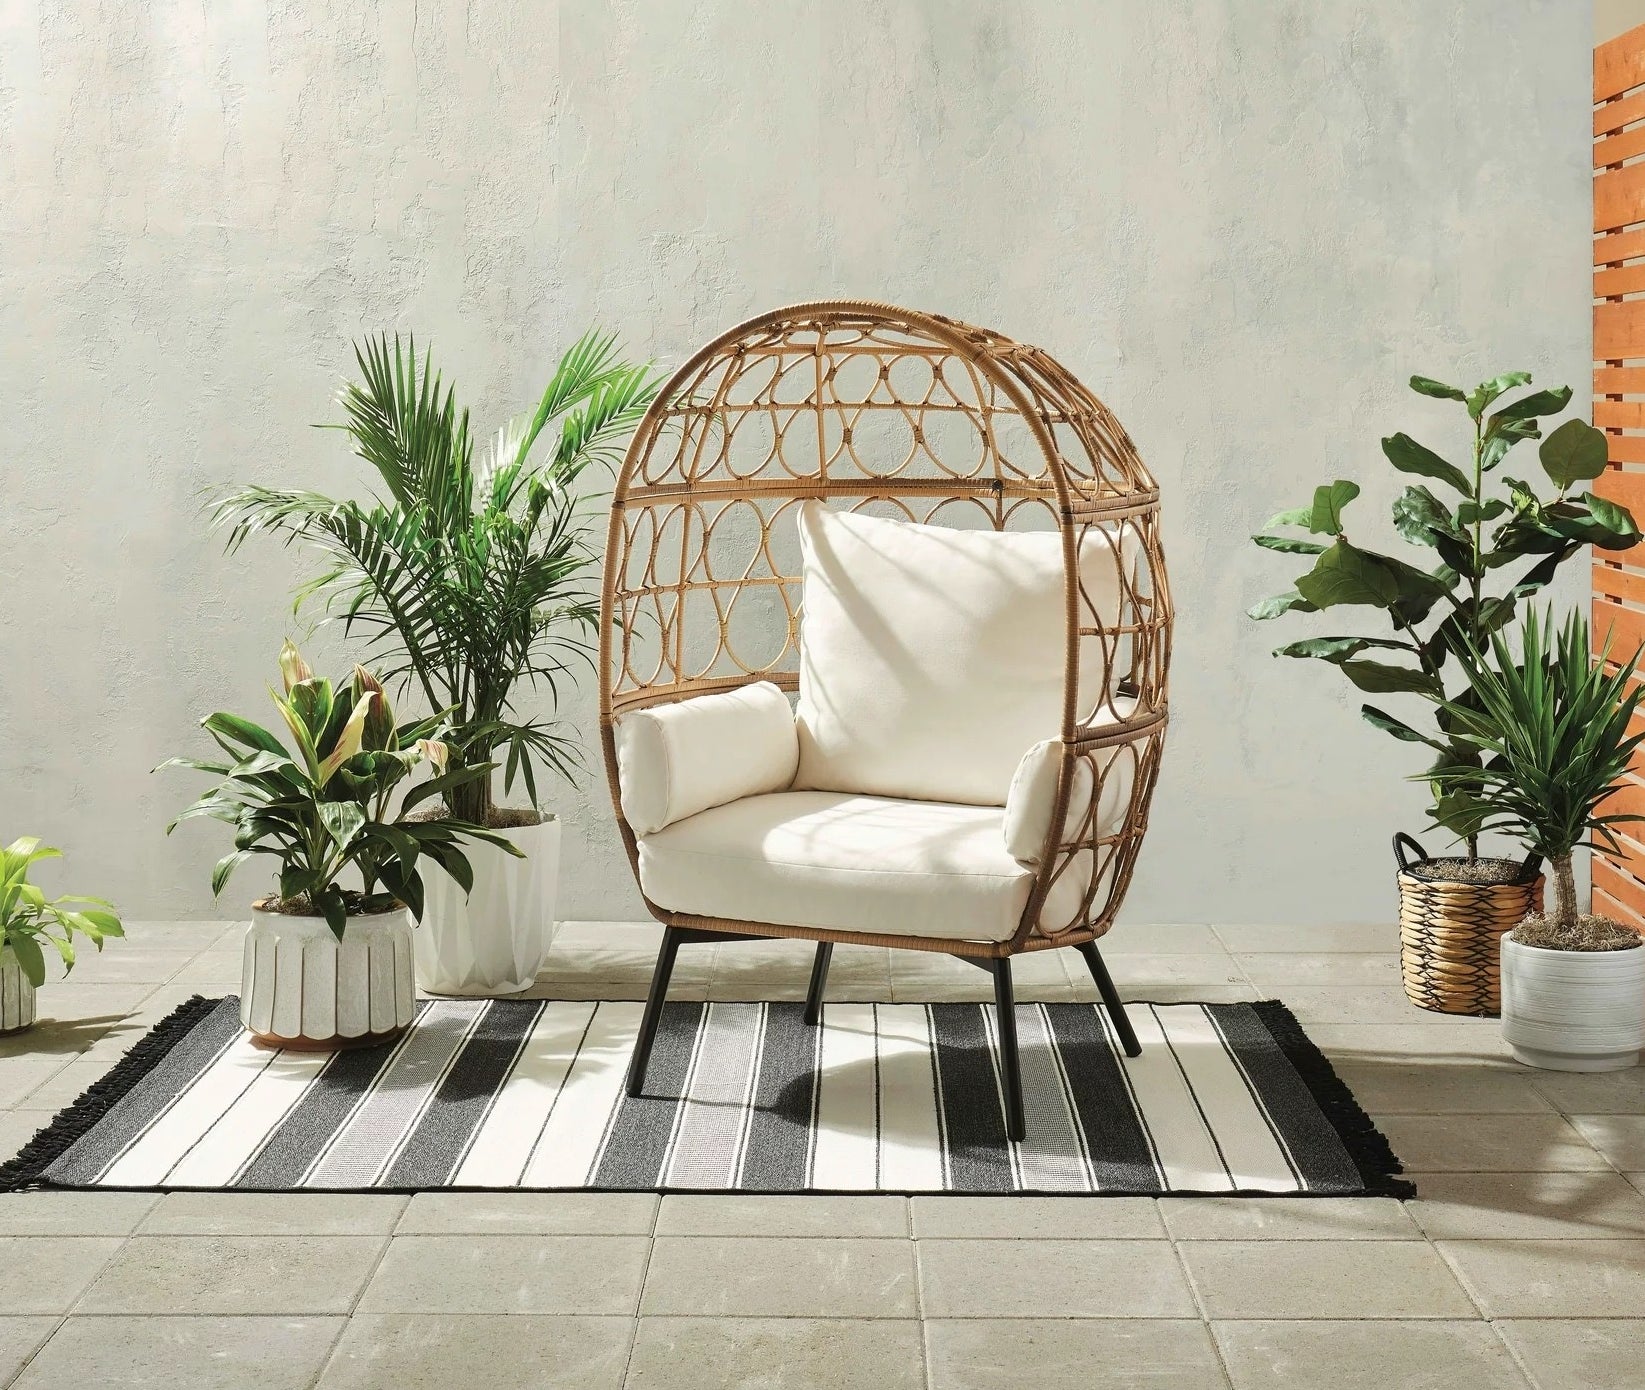 brown wicker egg chair with white cushions in a cute outdoor area